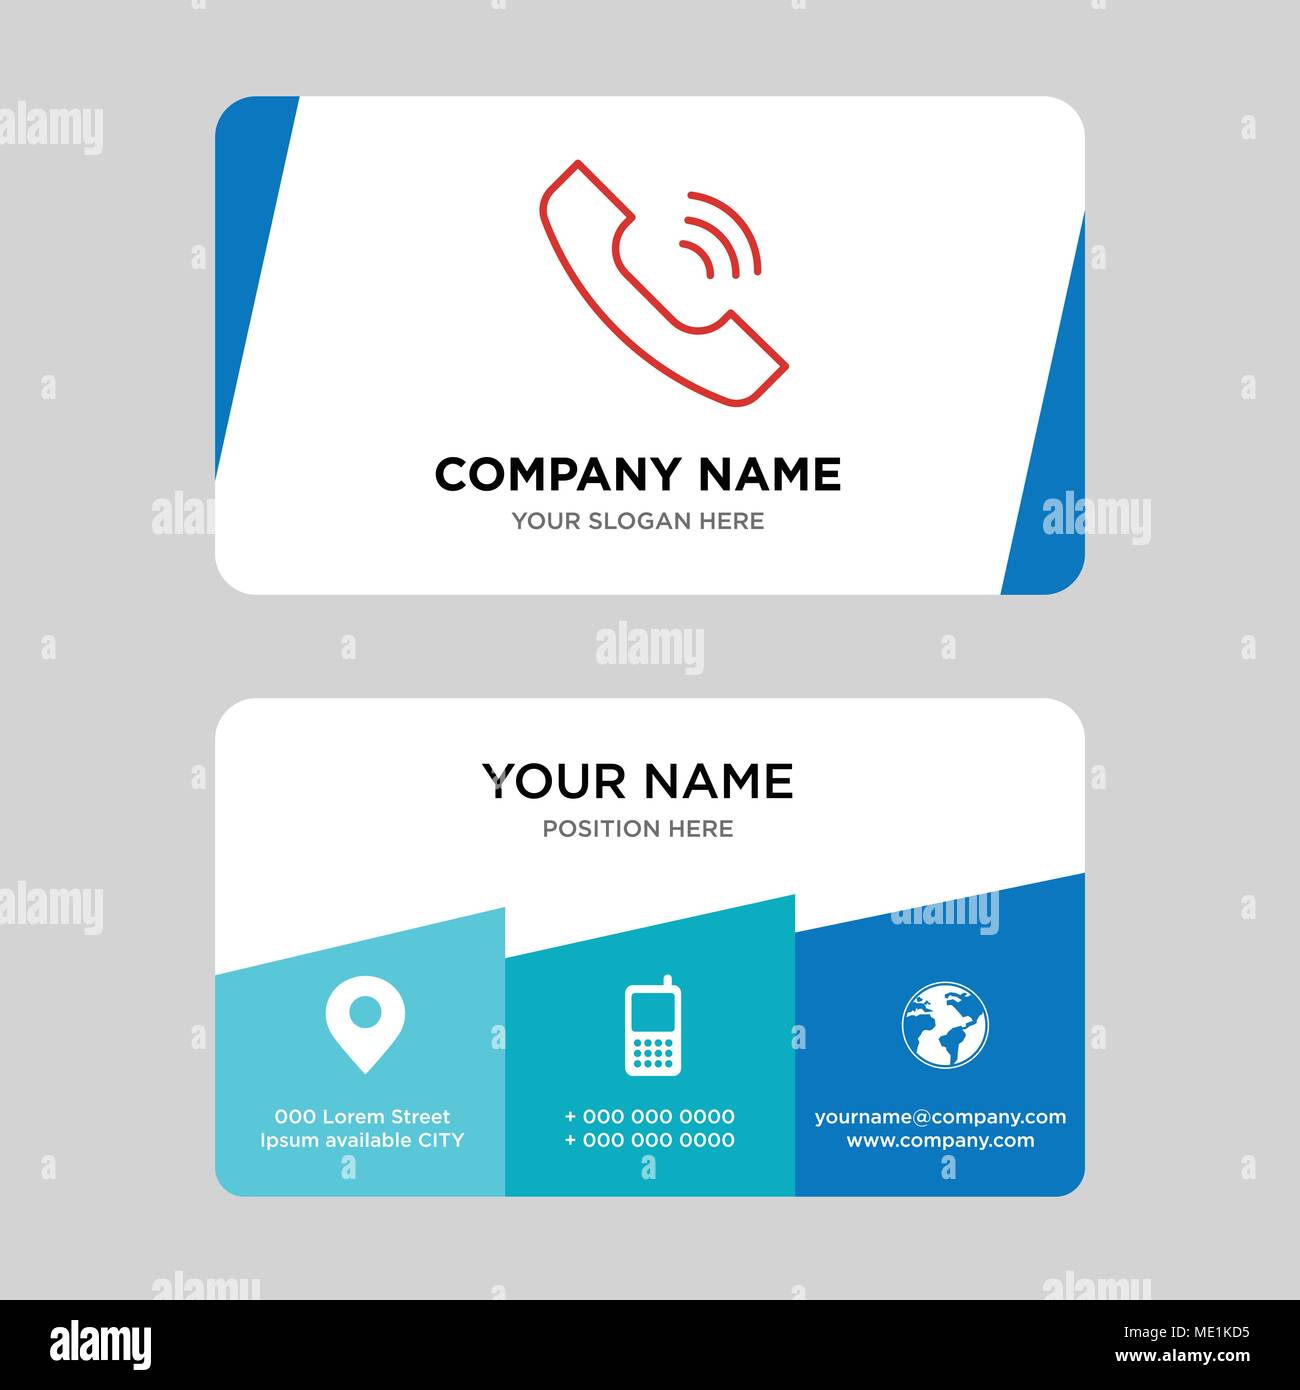 Call Cards Template from c8.alamy.com